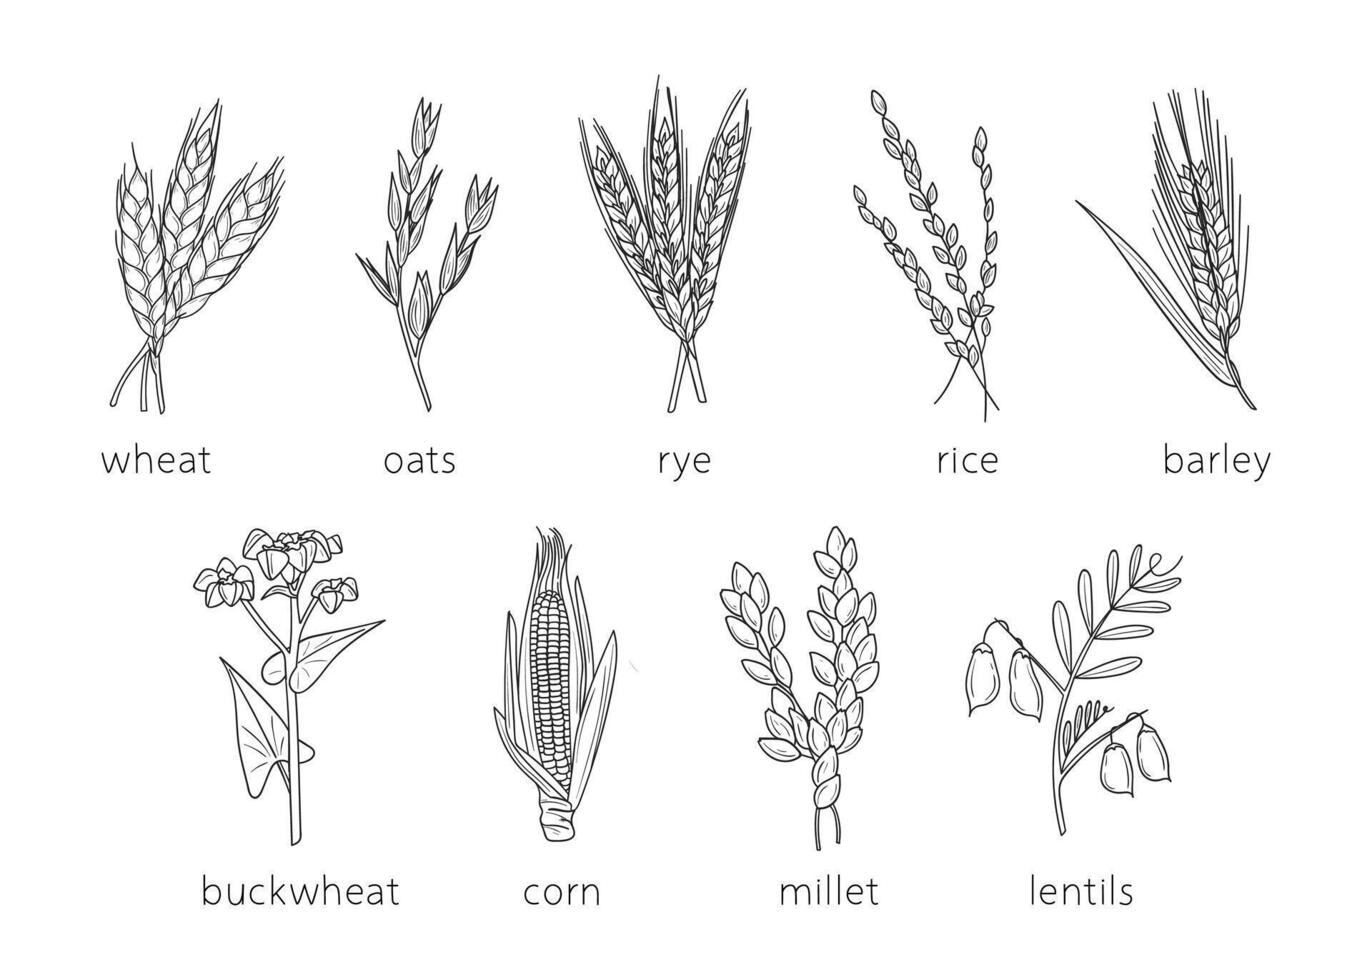 Cereal doodles, millet sketch, agriculture, wheat, barley, rice, corn, buckwheat, millet, lentils. Thin line art about cereal plants. vector